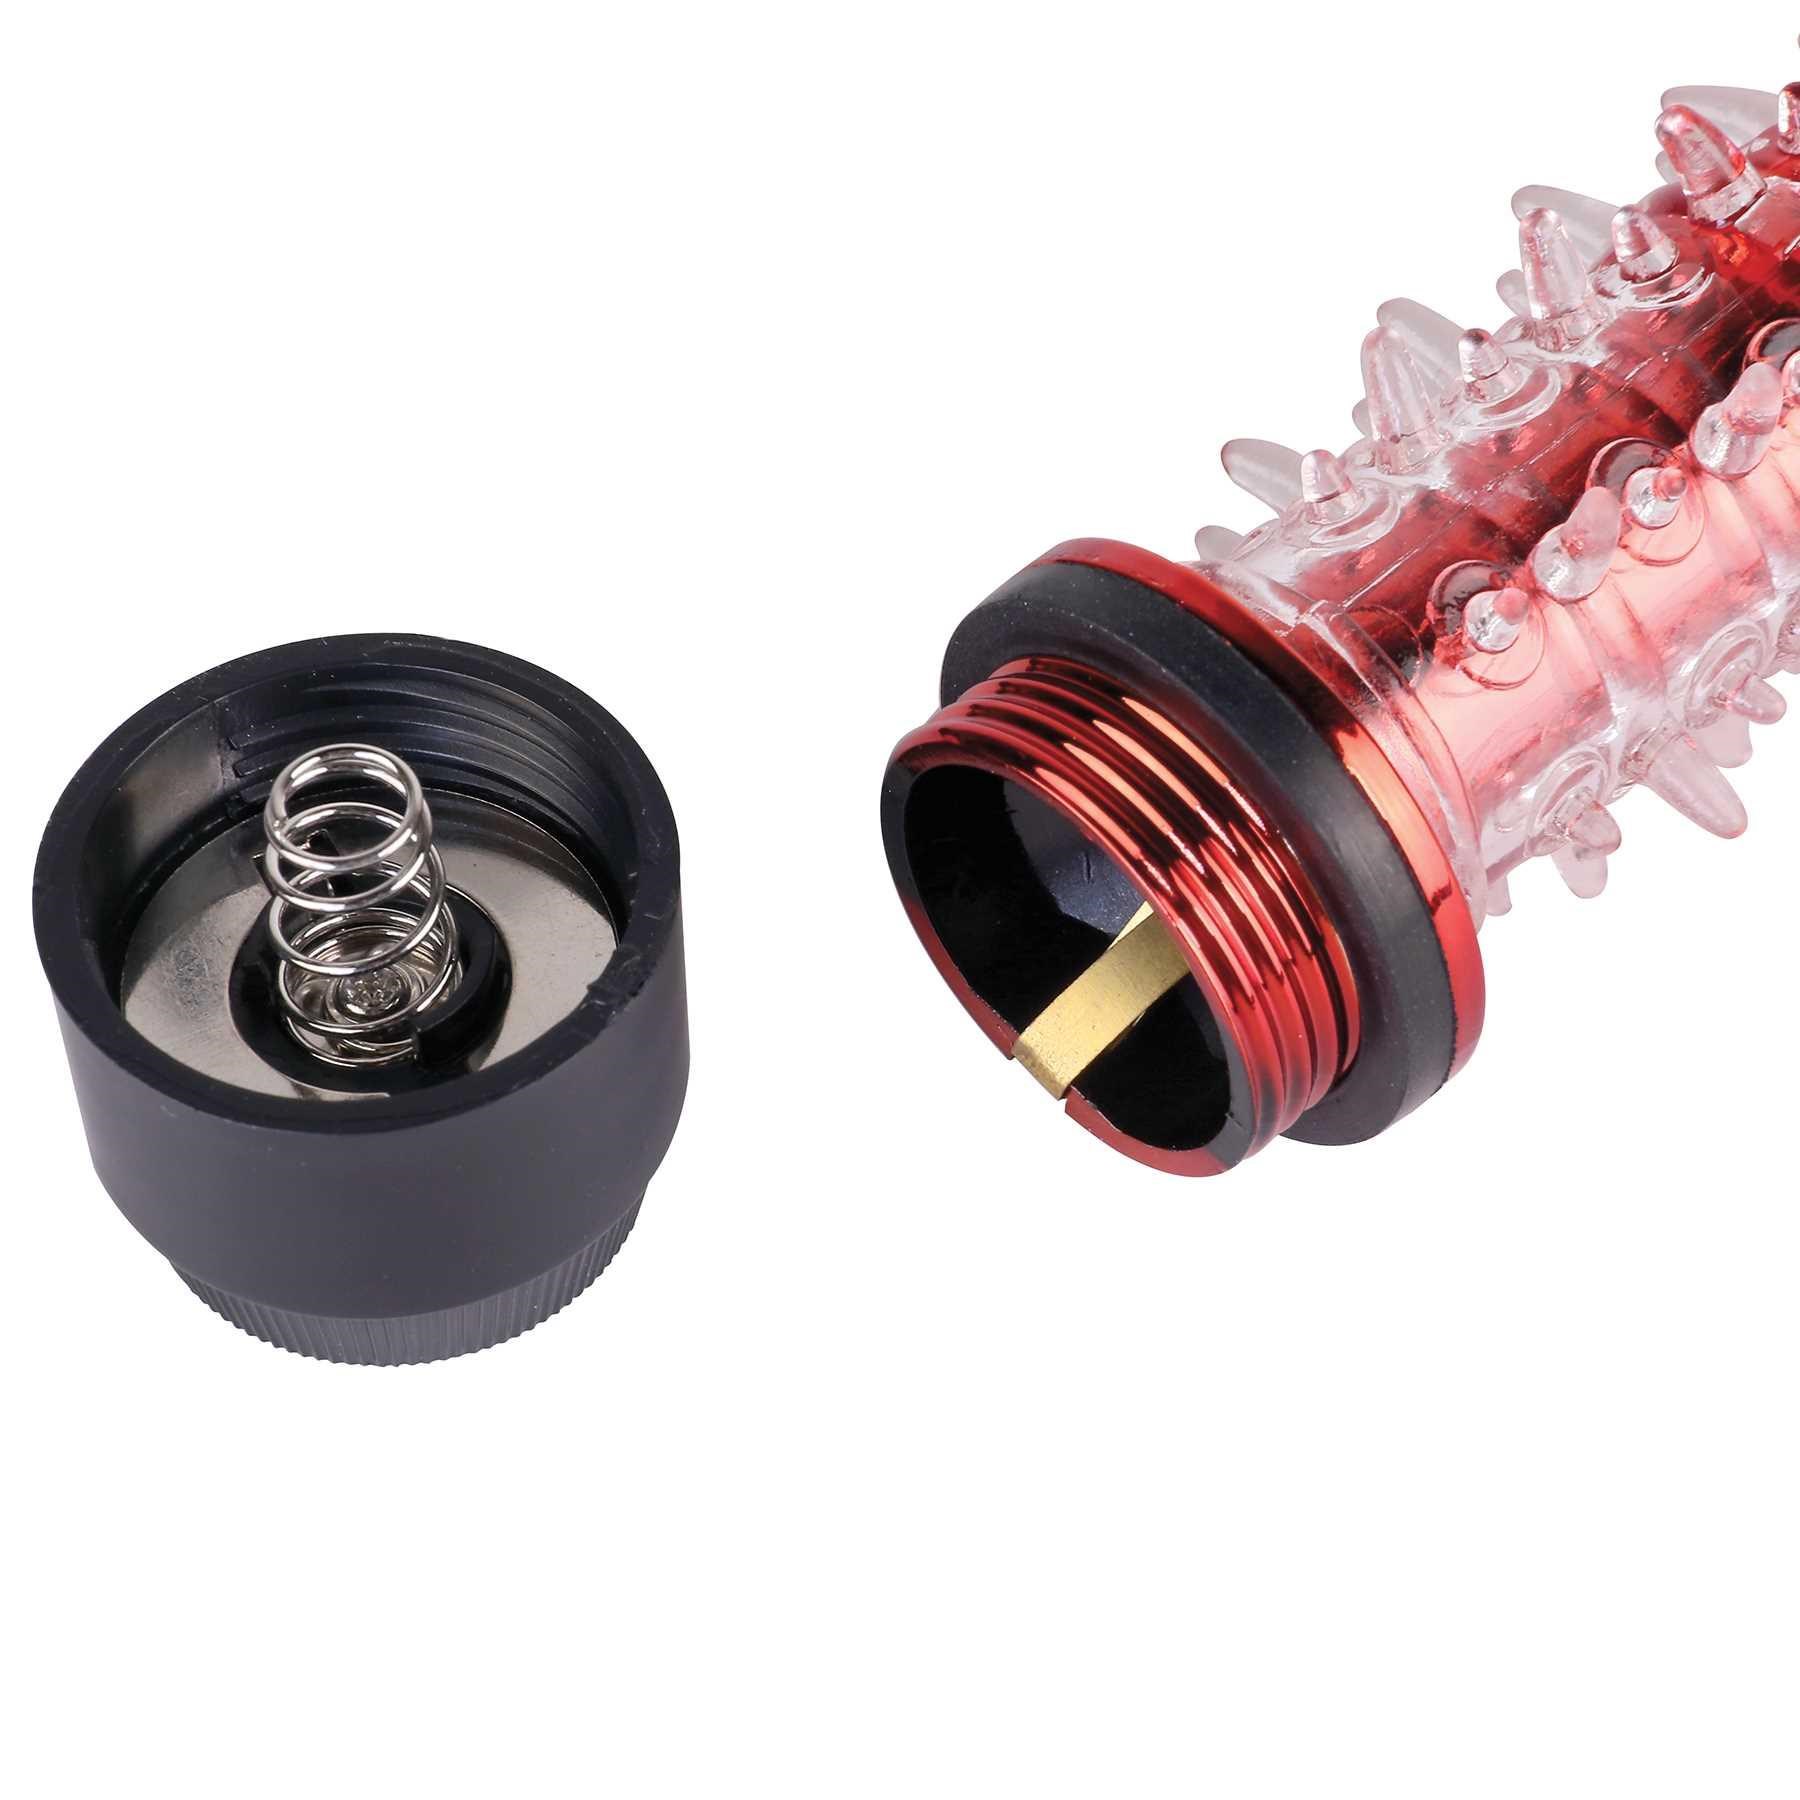 Nubby Lover Vibrator with base open for battery